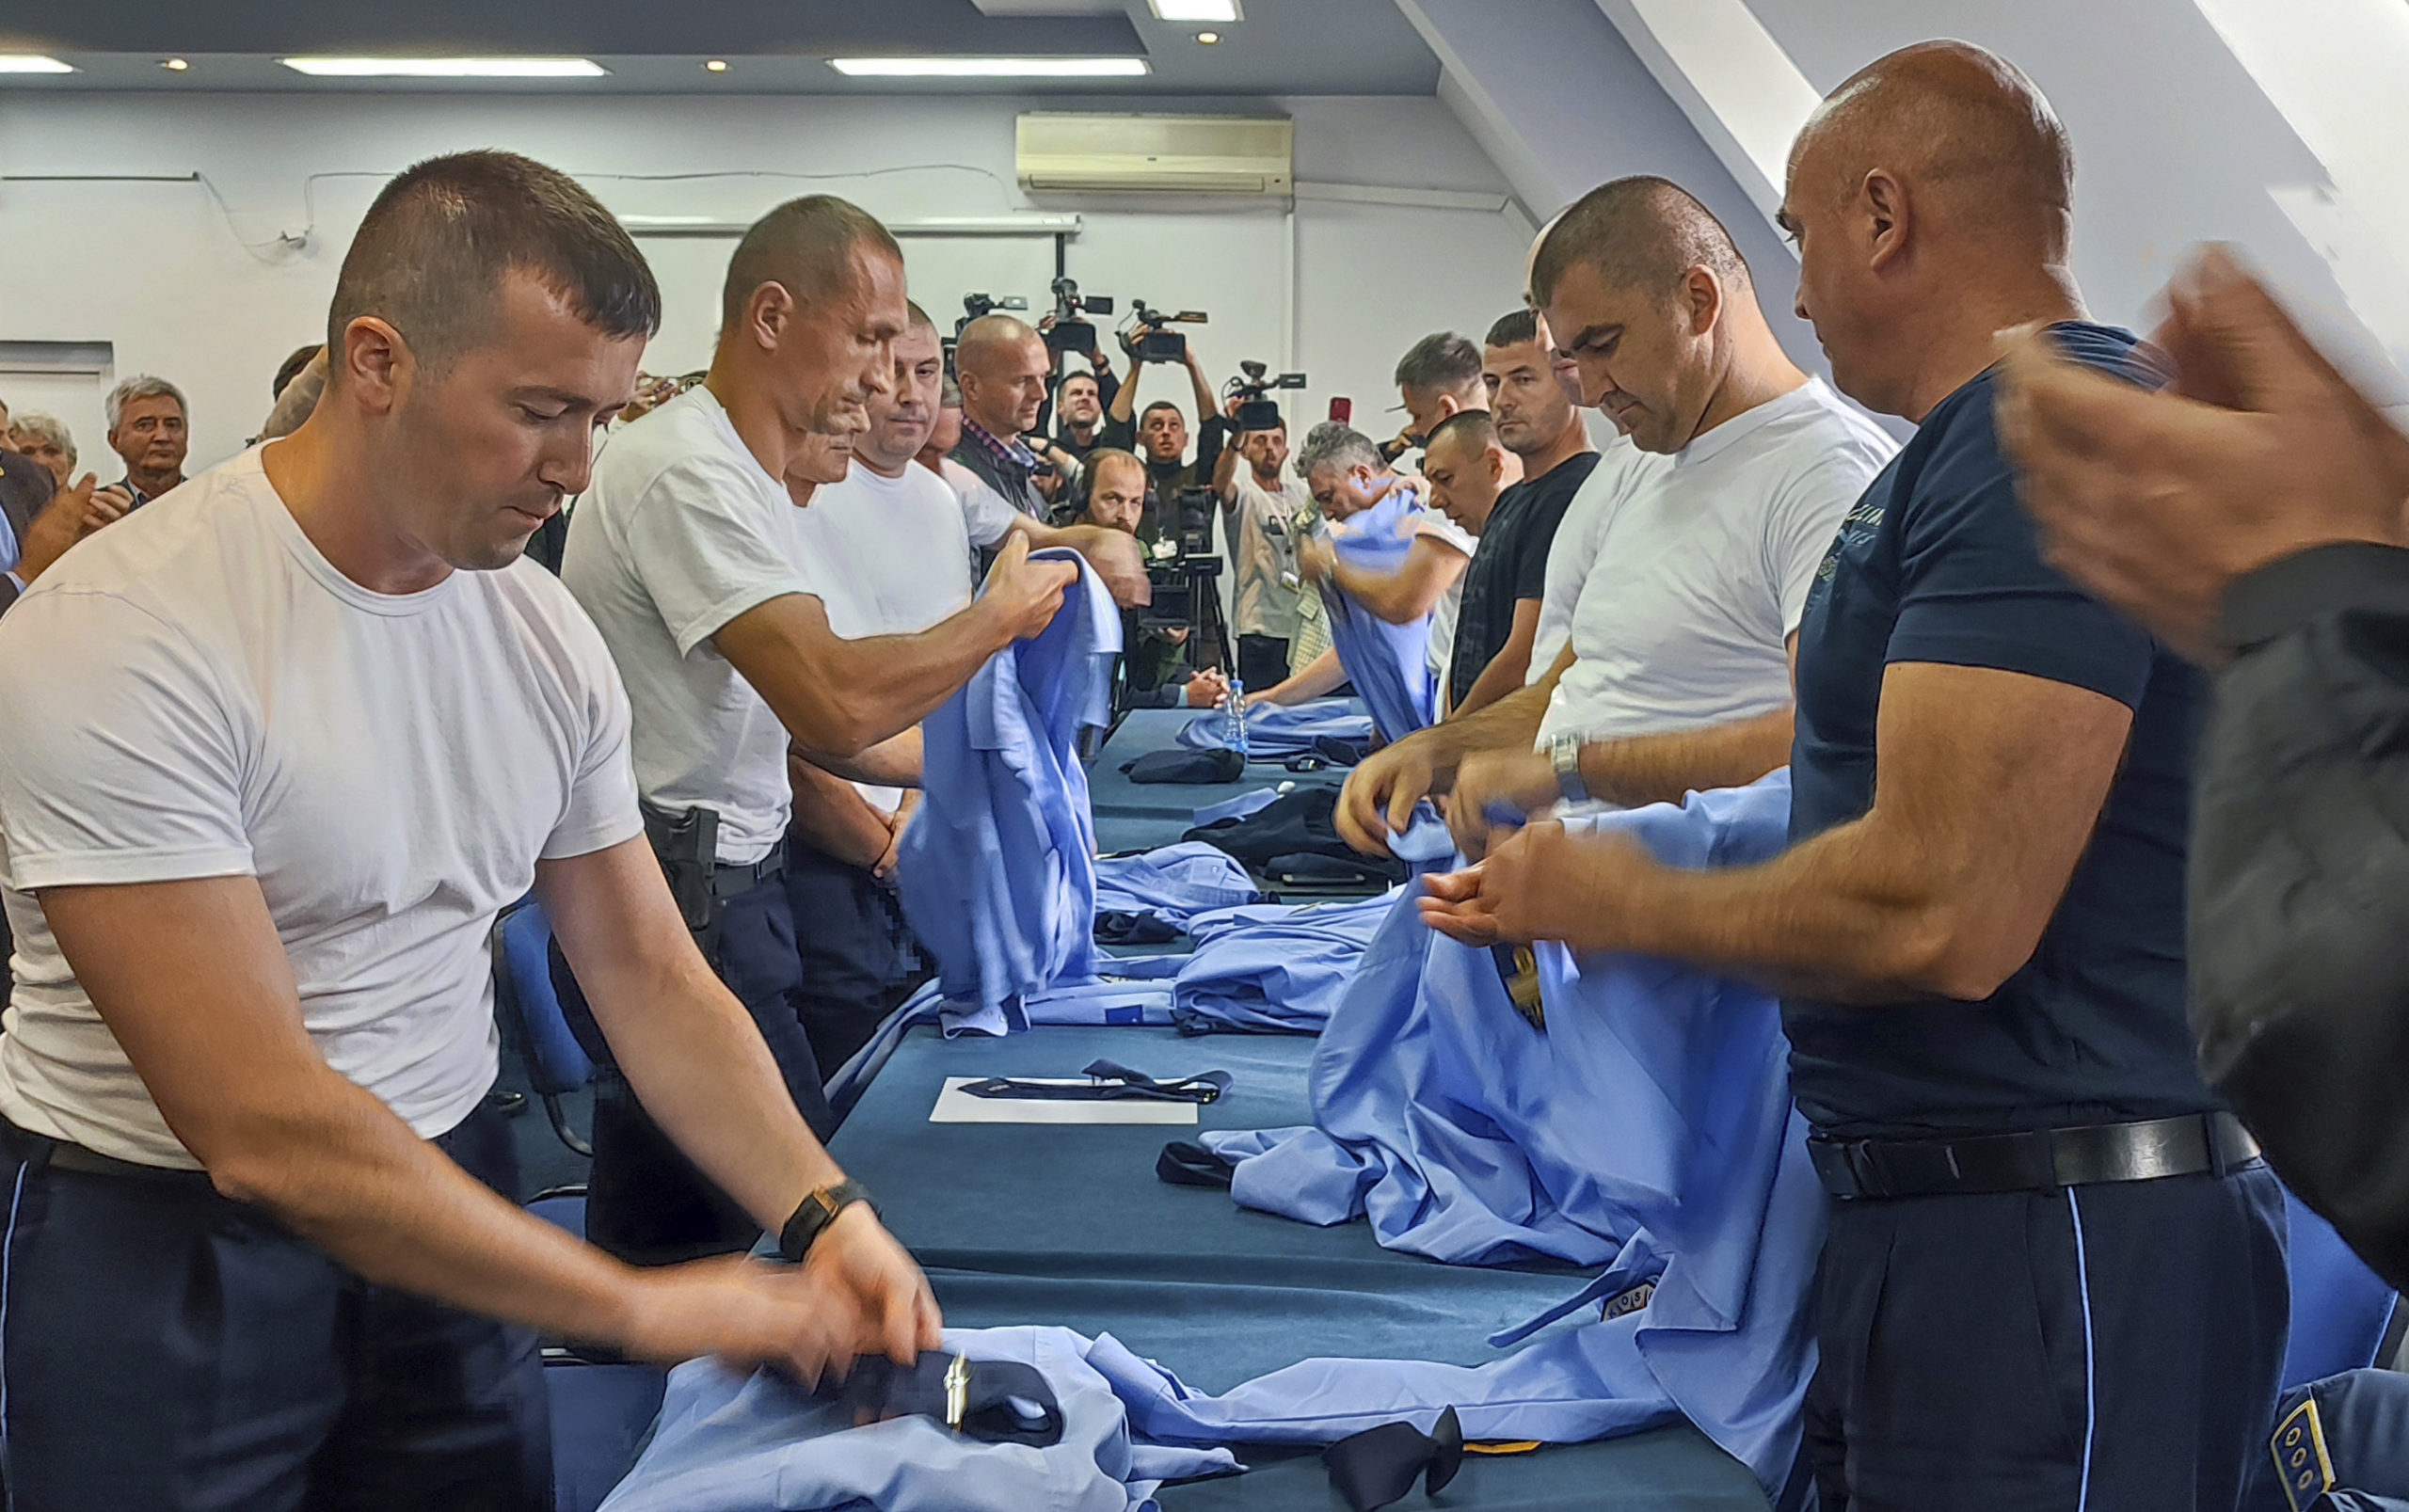 Serb police officers took off their uniforms after a a mass resignation in the town of Zvecan, Kosovo, on Saturday.